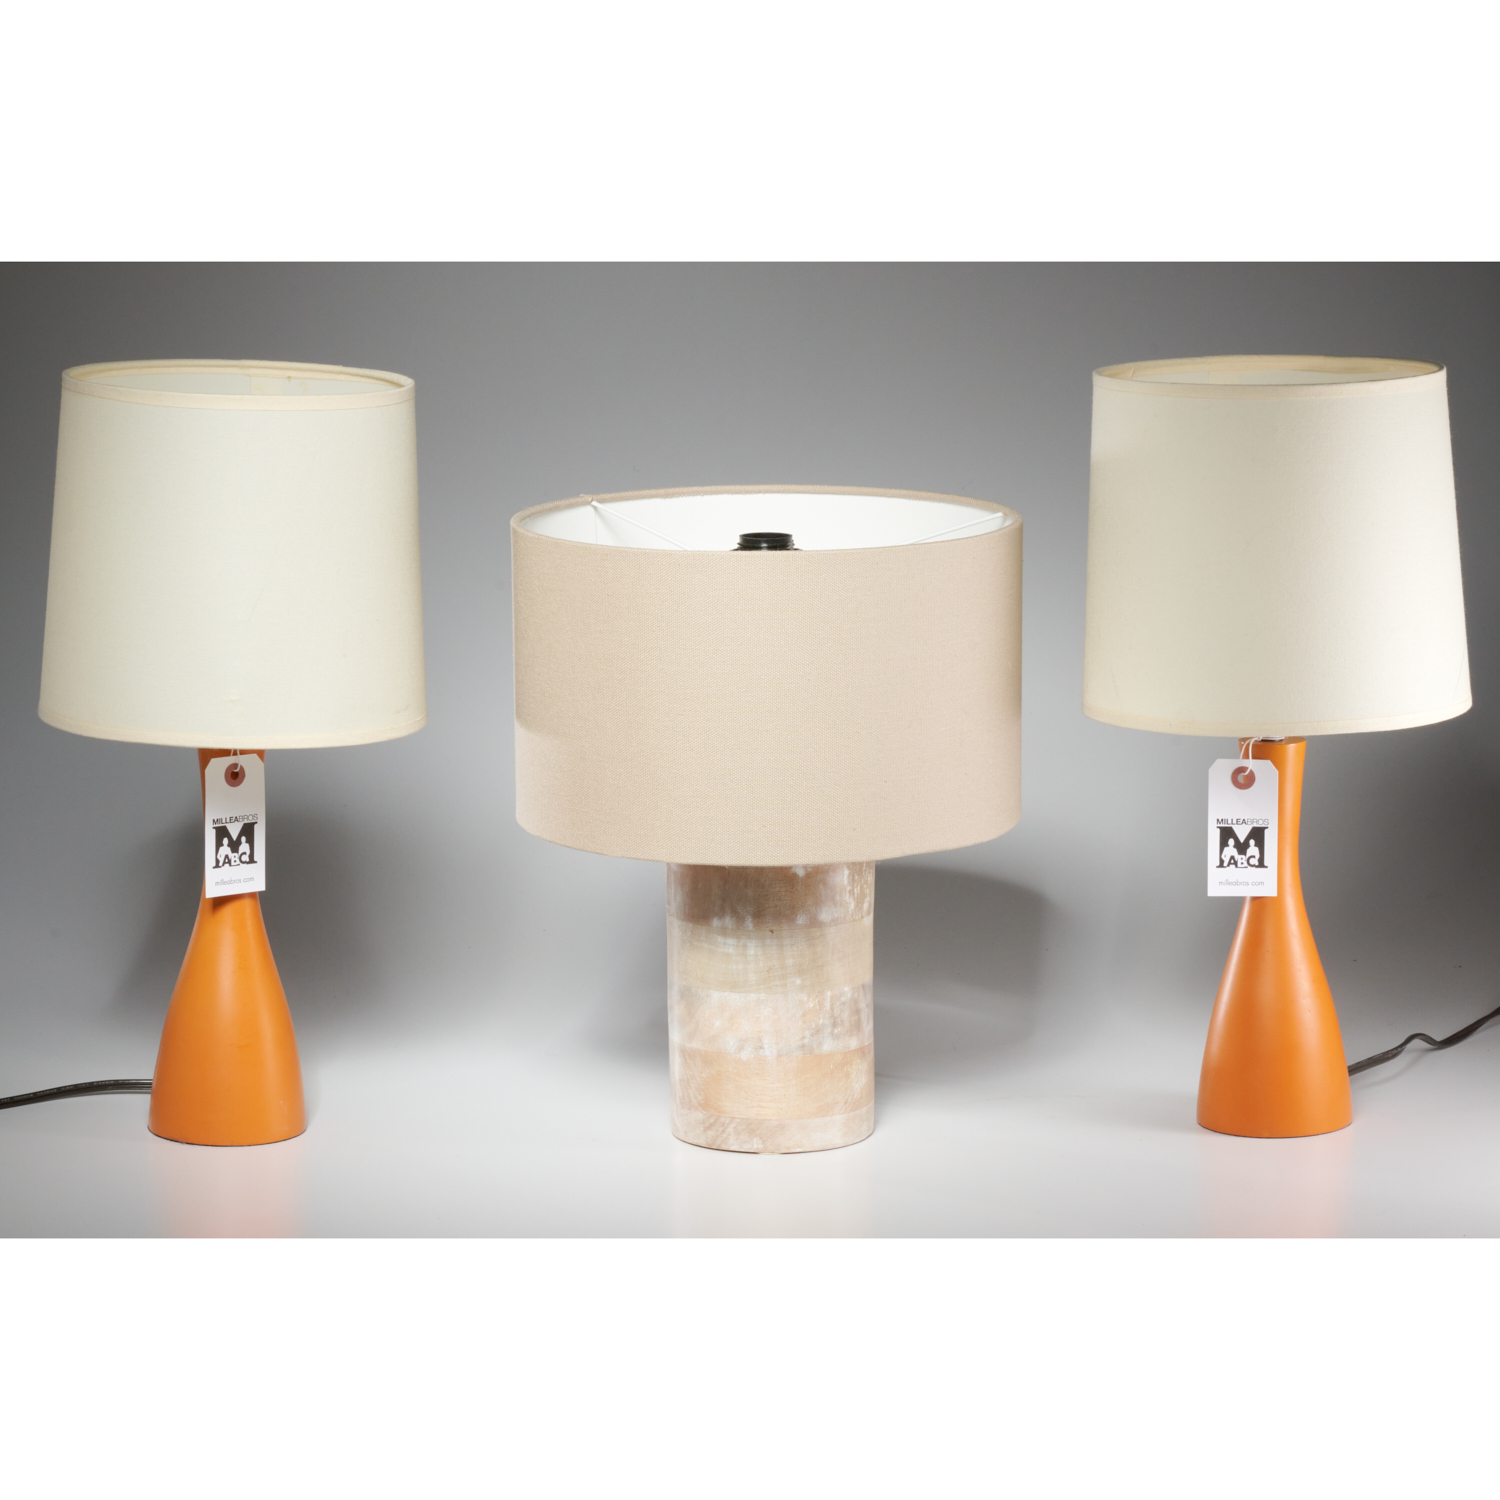  3 SMALL MODERNIST TABLE LAMPS 3609c5